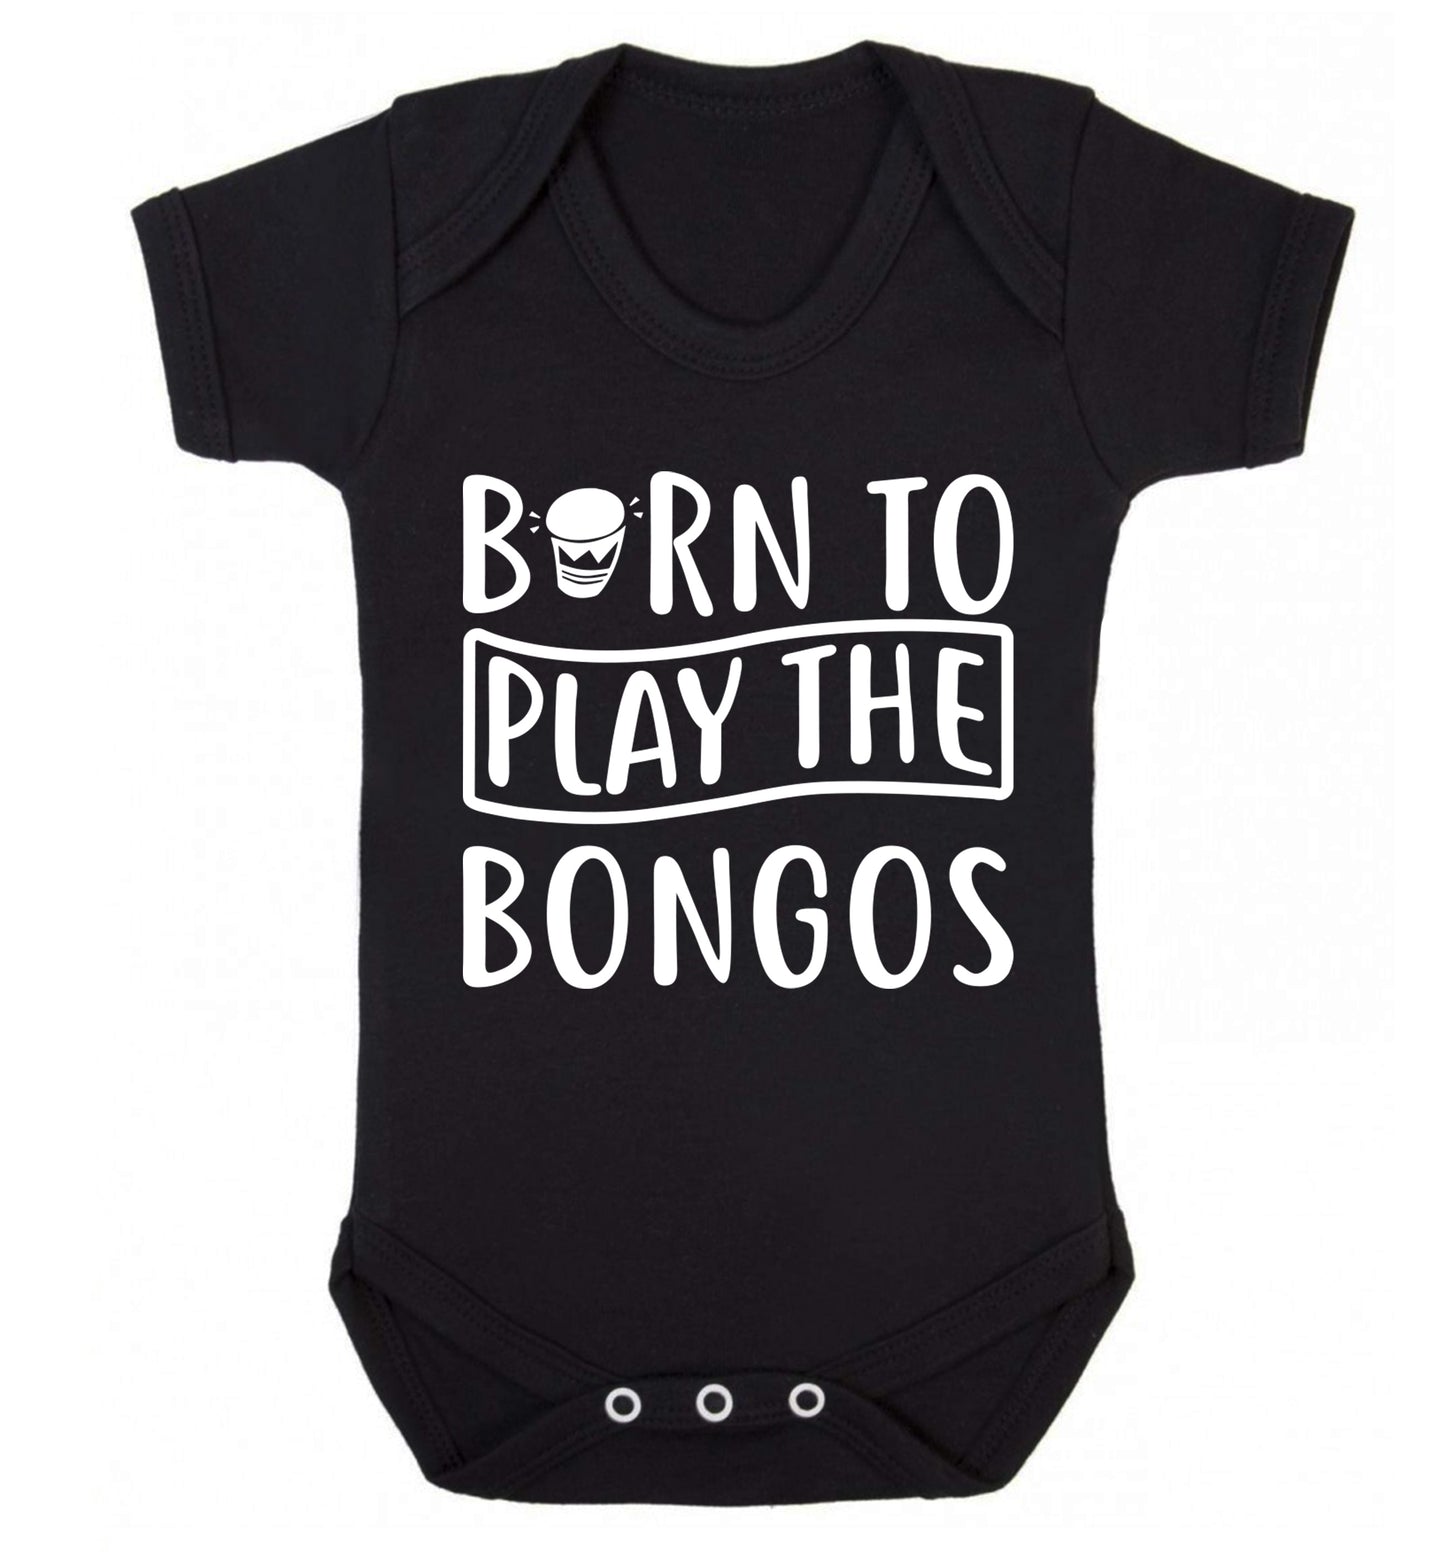 Born to play the bongos Baby Vest black 18-24 months